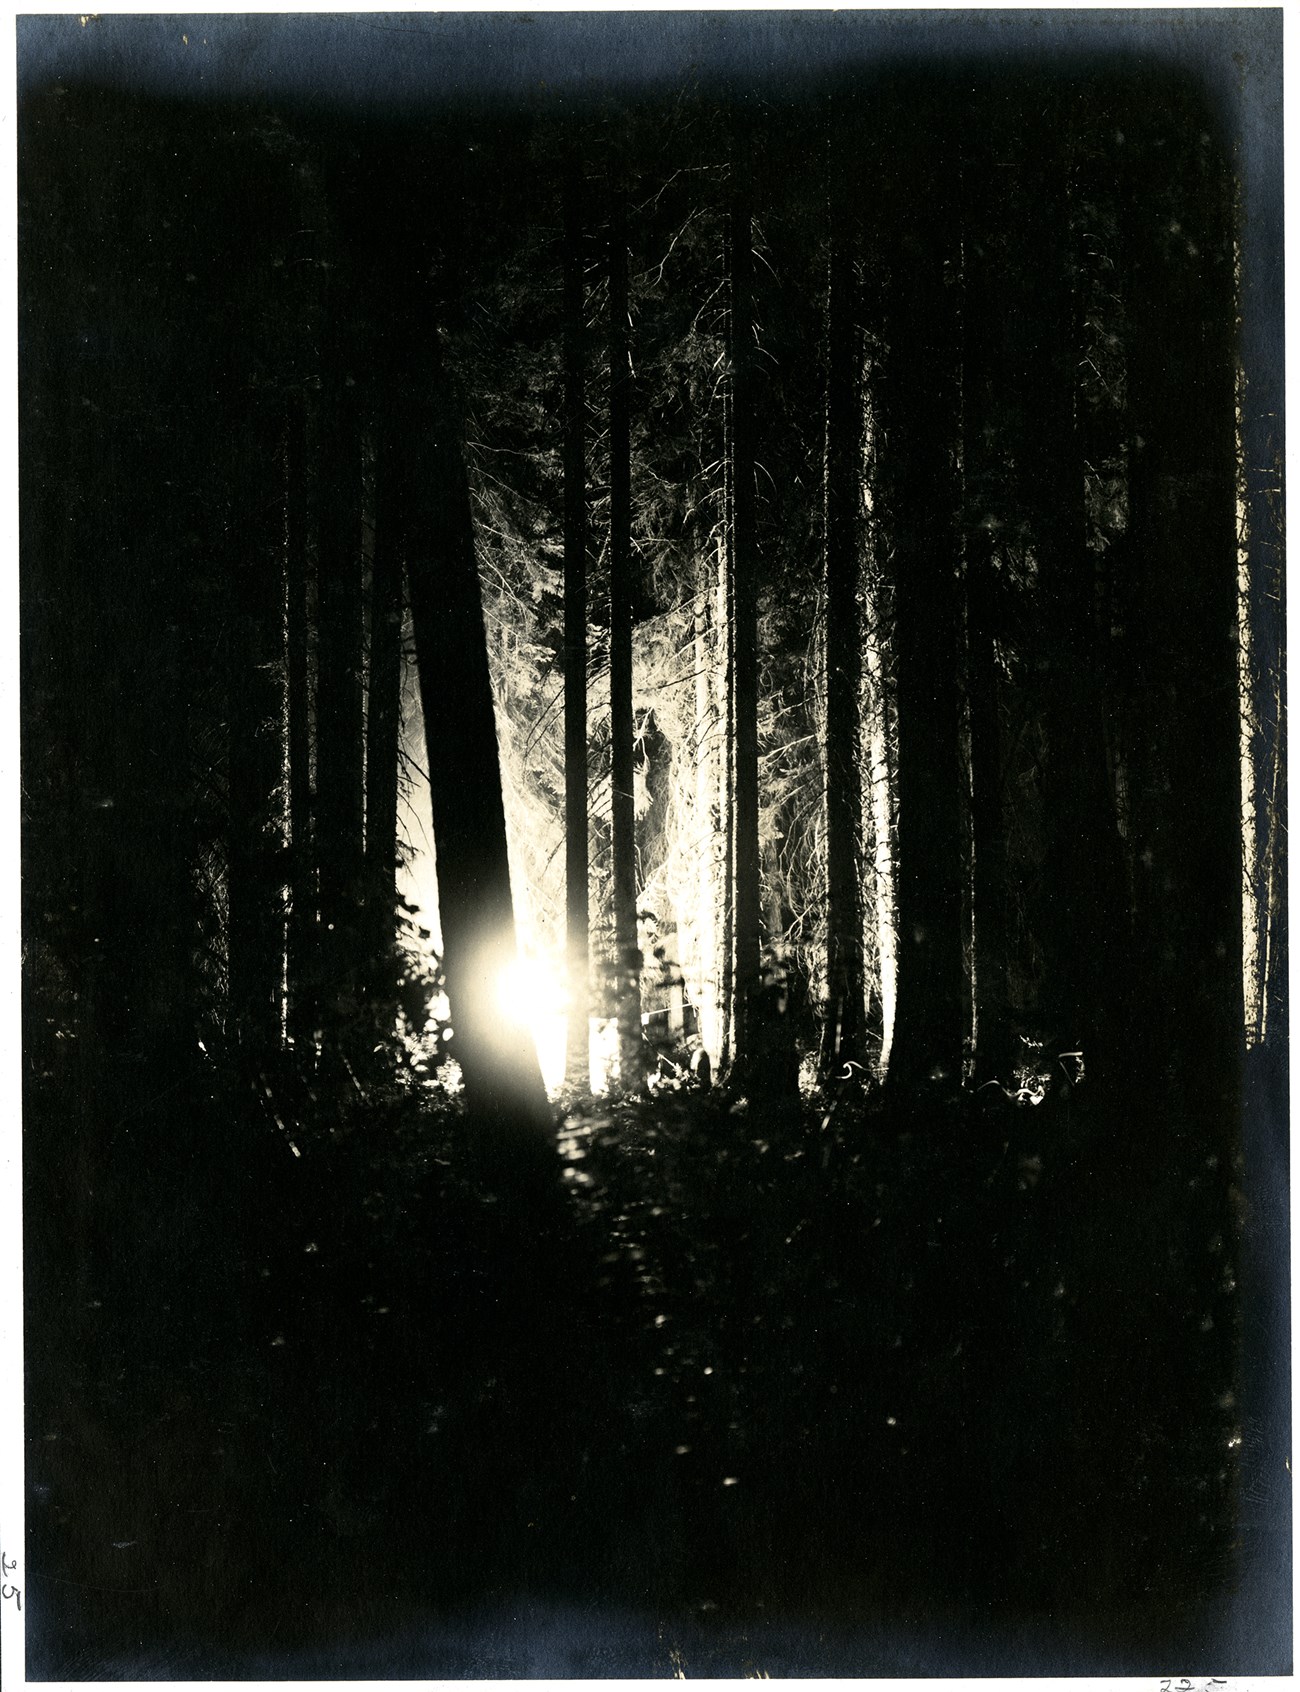 Bright light in a dark night. Light comes from behind a tree in dense forest. A tent or blanket is on a rope between trees